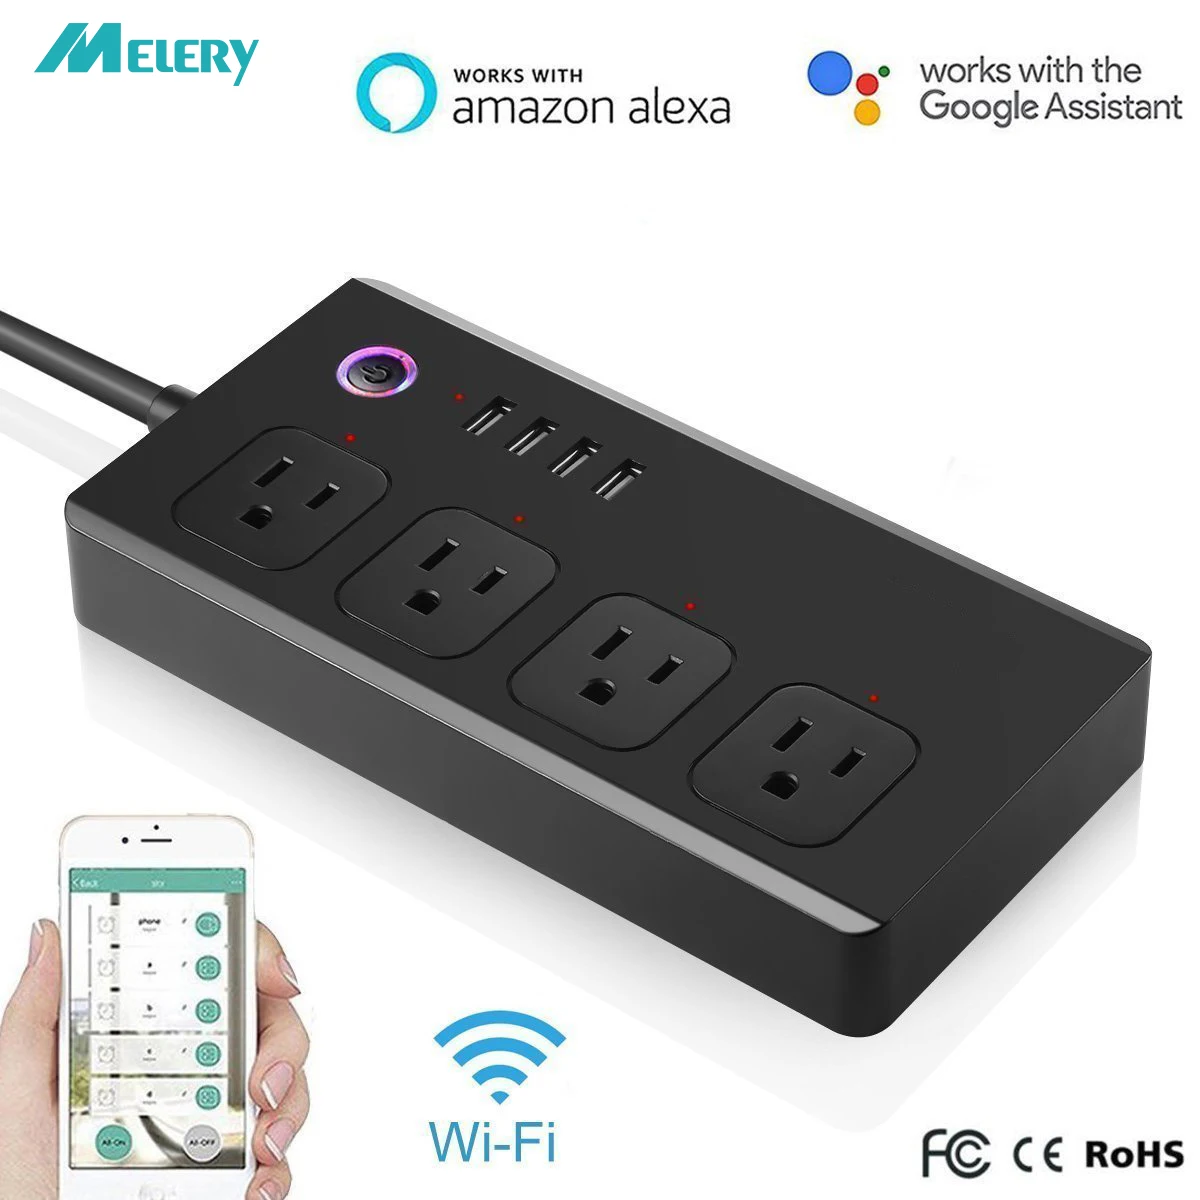 

Smart WiFi Power Strip Surge Protector 4 US Outlet Plug Socket with USB Charging Ports Homekit Work with Alexa Echo,Google Home